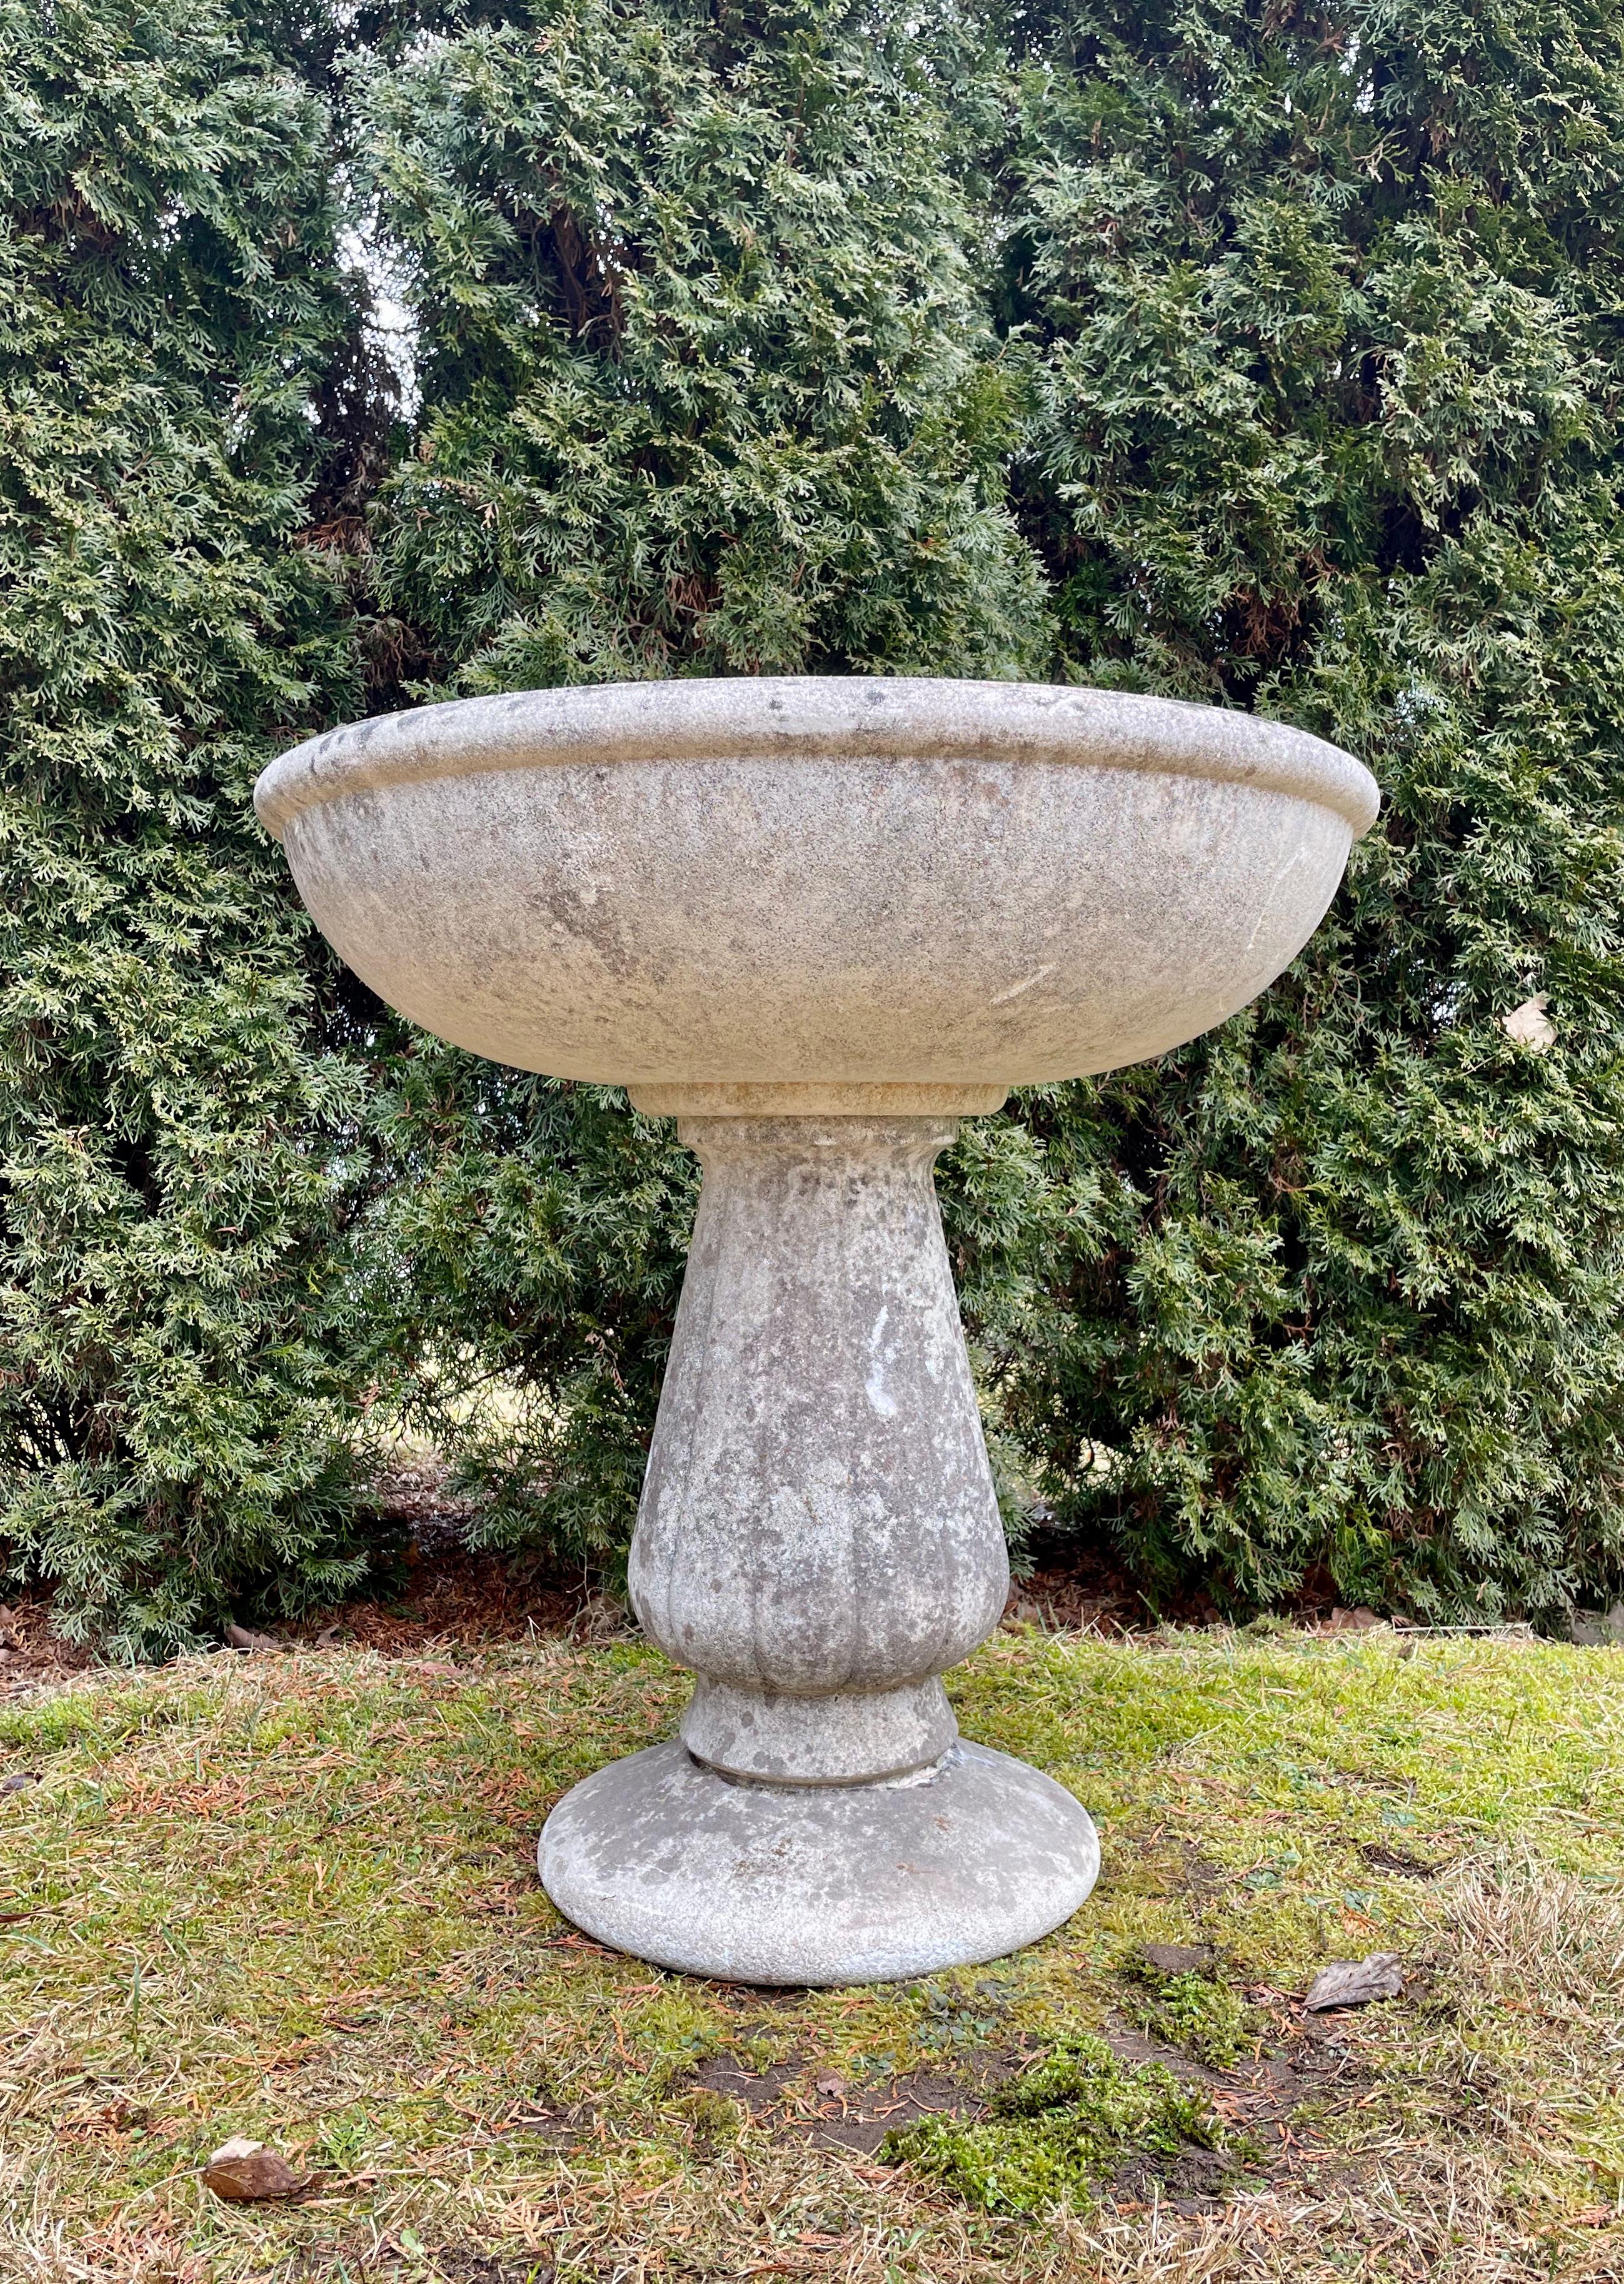 The form and patina on this midcentury French cast stone font are simply wonderful and its uses so varied. In two parts (the riser and foot are separate from the bowl), it can be used as a font, planter, fountain, or fill it with sea shells and